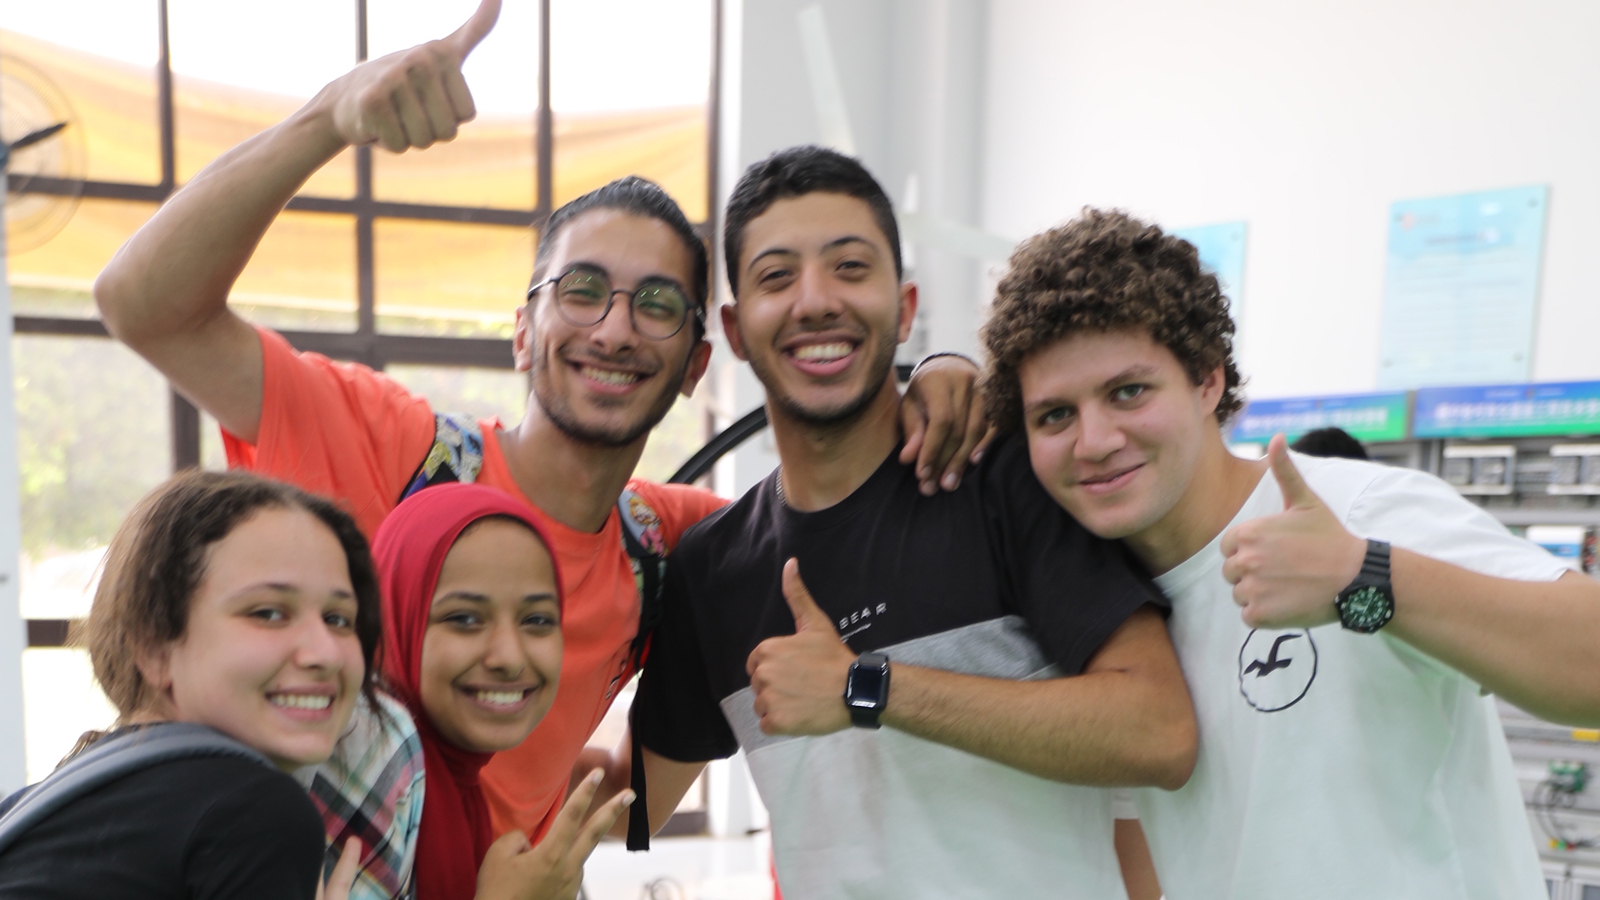 Students smiling and giving thumbs up